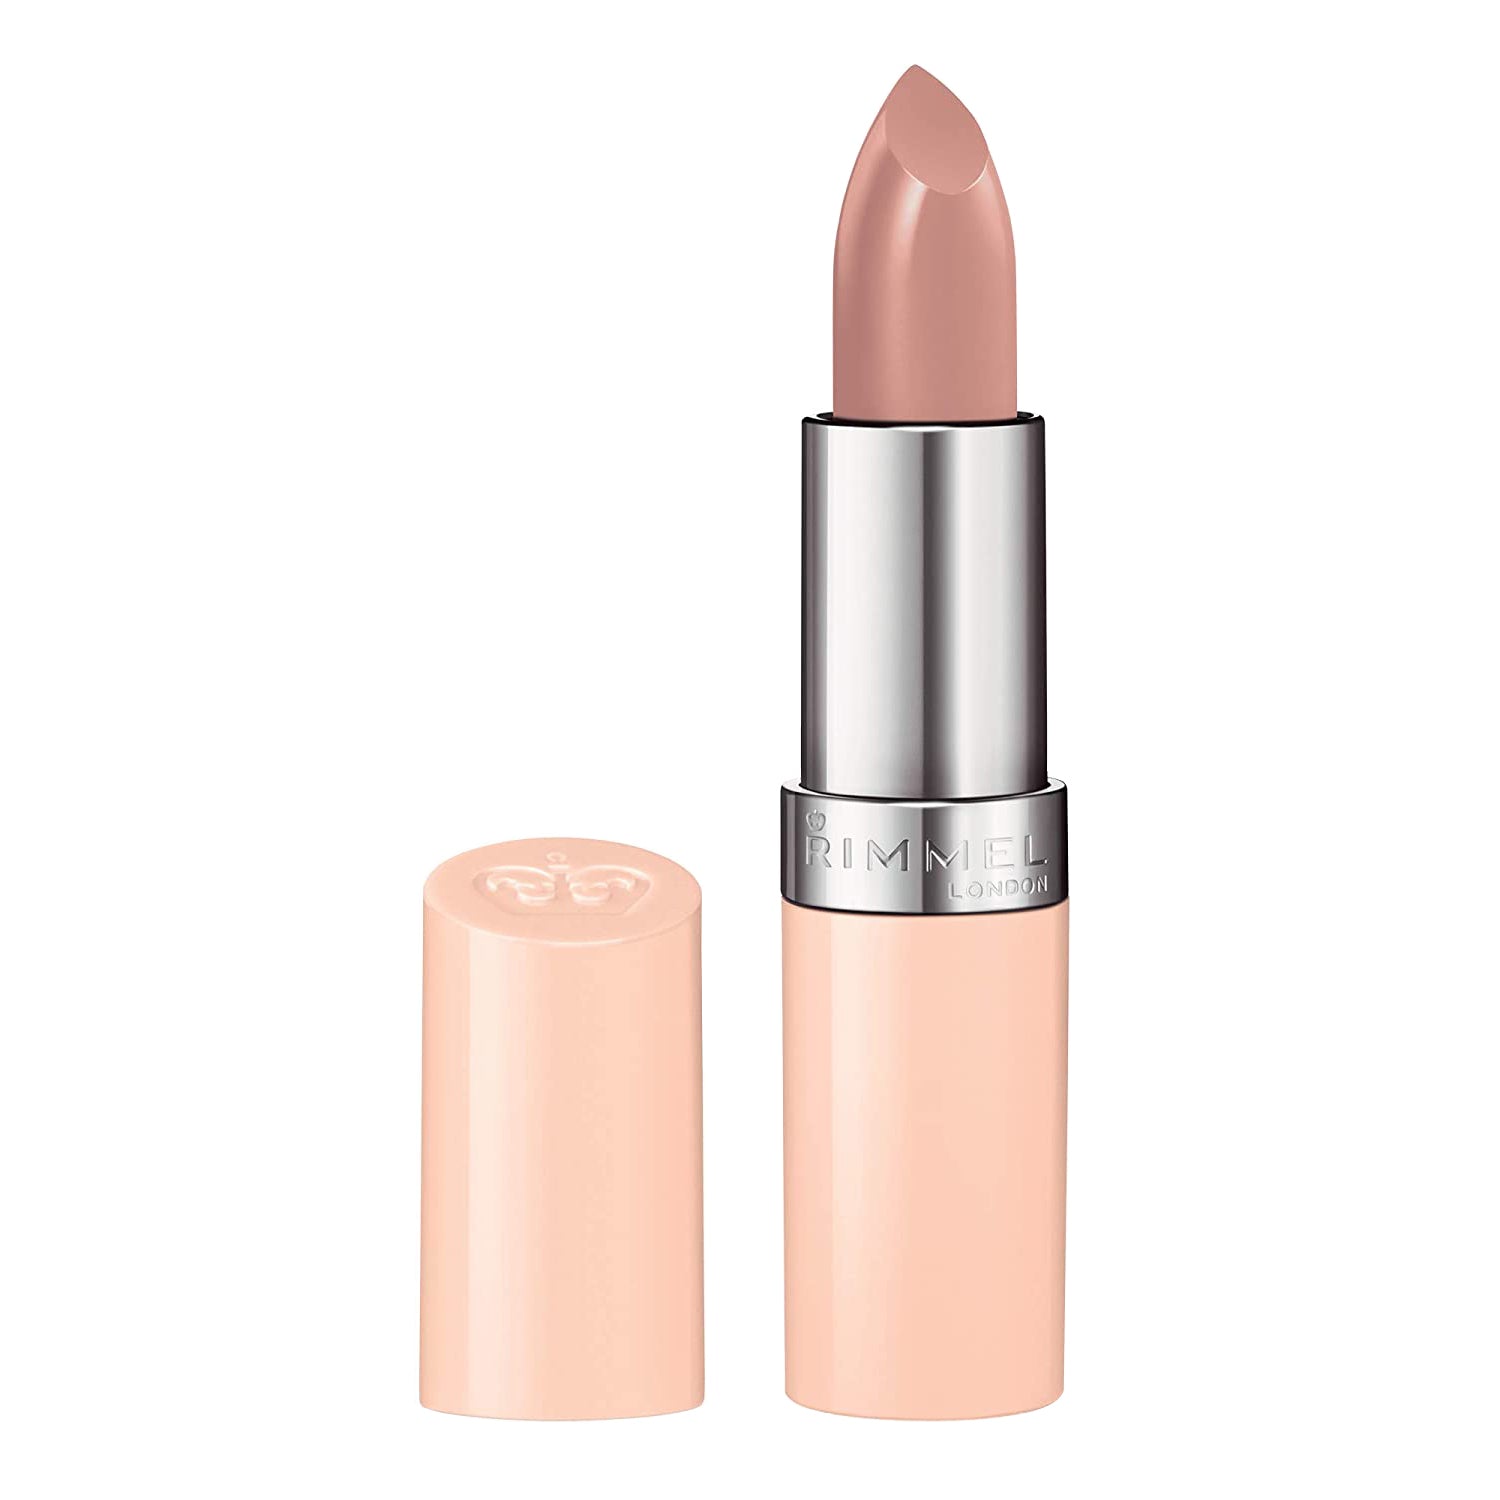 Rimmel London Lasting Finish by Kate Nude Collection Lipstick, 45